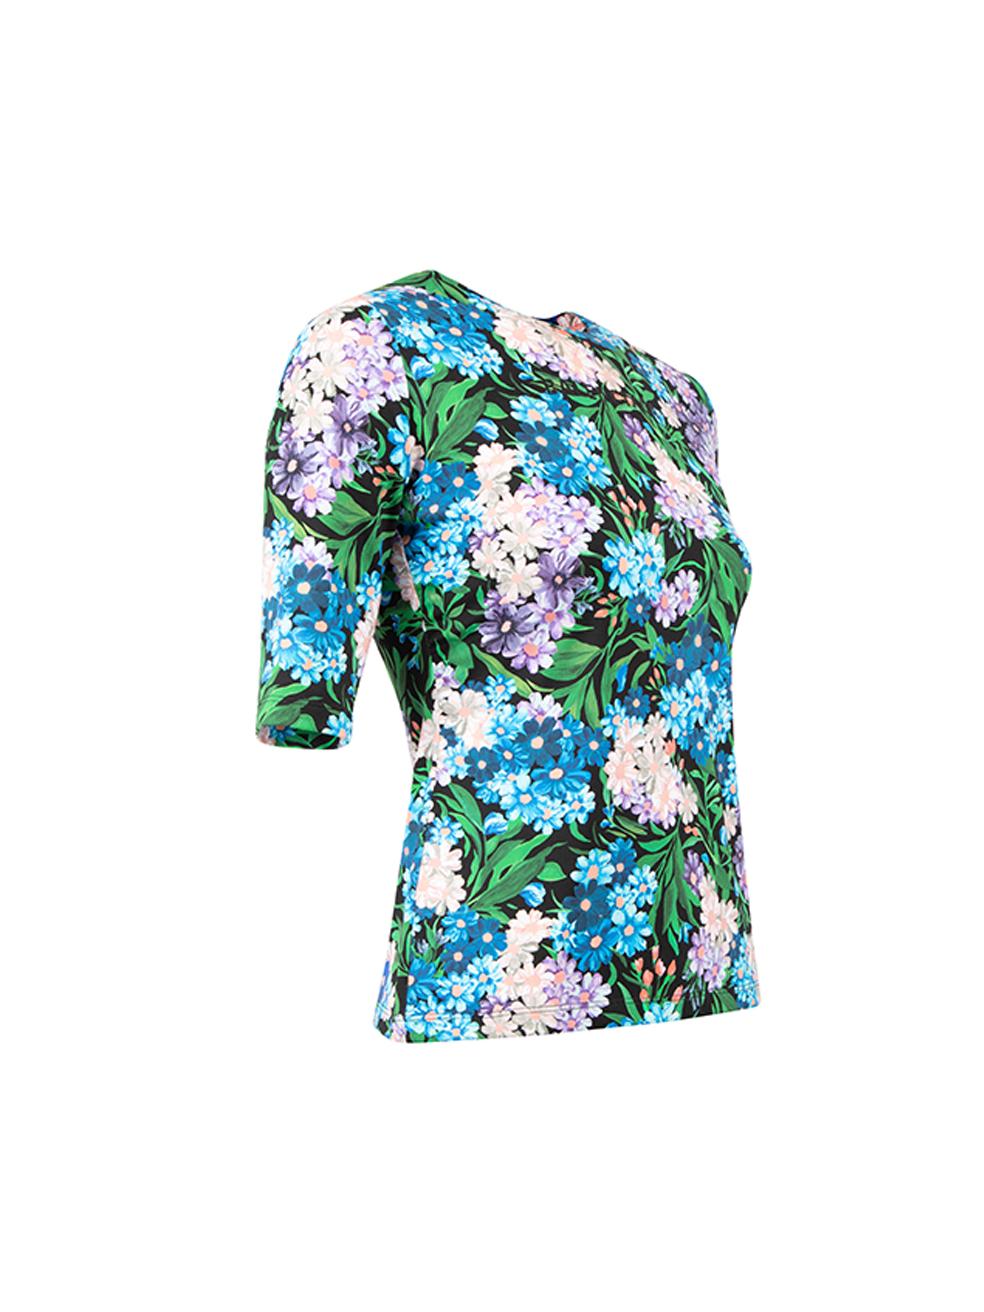 CONDITION is Very good. Minimal wear to top is evident. Minimal wear and some stains to the neckline on this used Balenciaga designer resale item. 
 
 Details
  Blue
 Synthetic
 Mid sleeves top
 Floral pattern
 Round neckline
 
 
 Made in Italy
 
